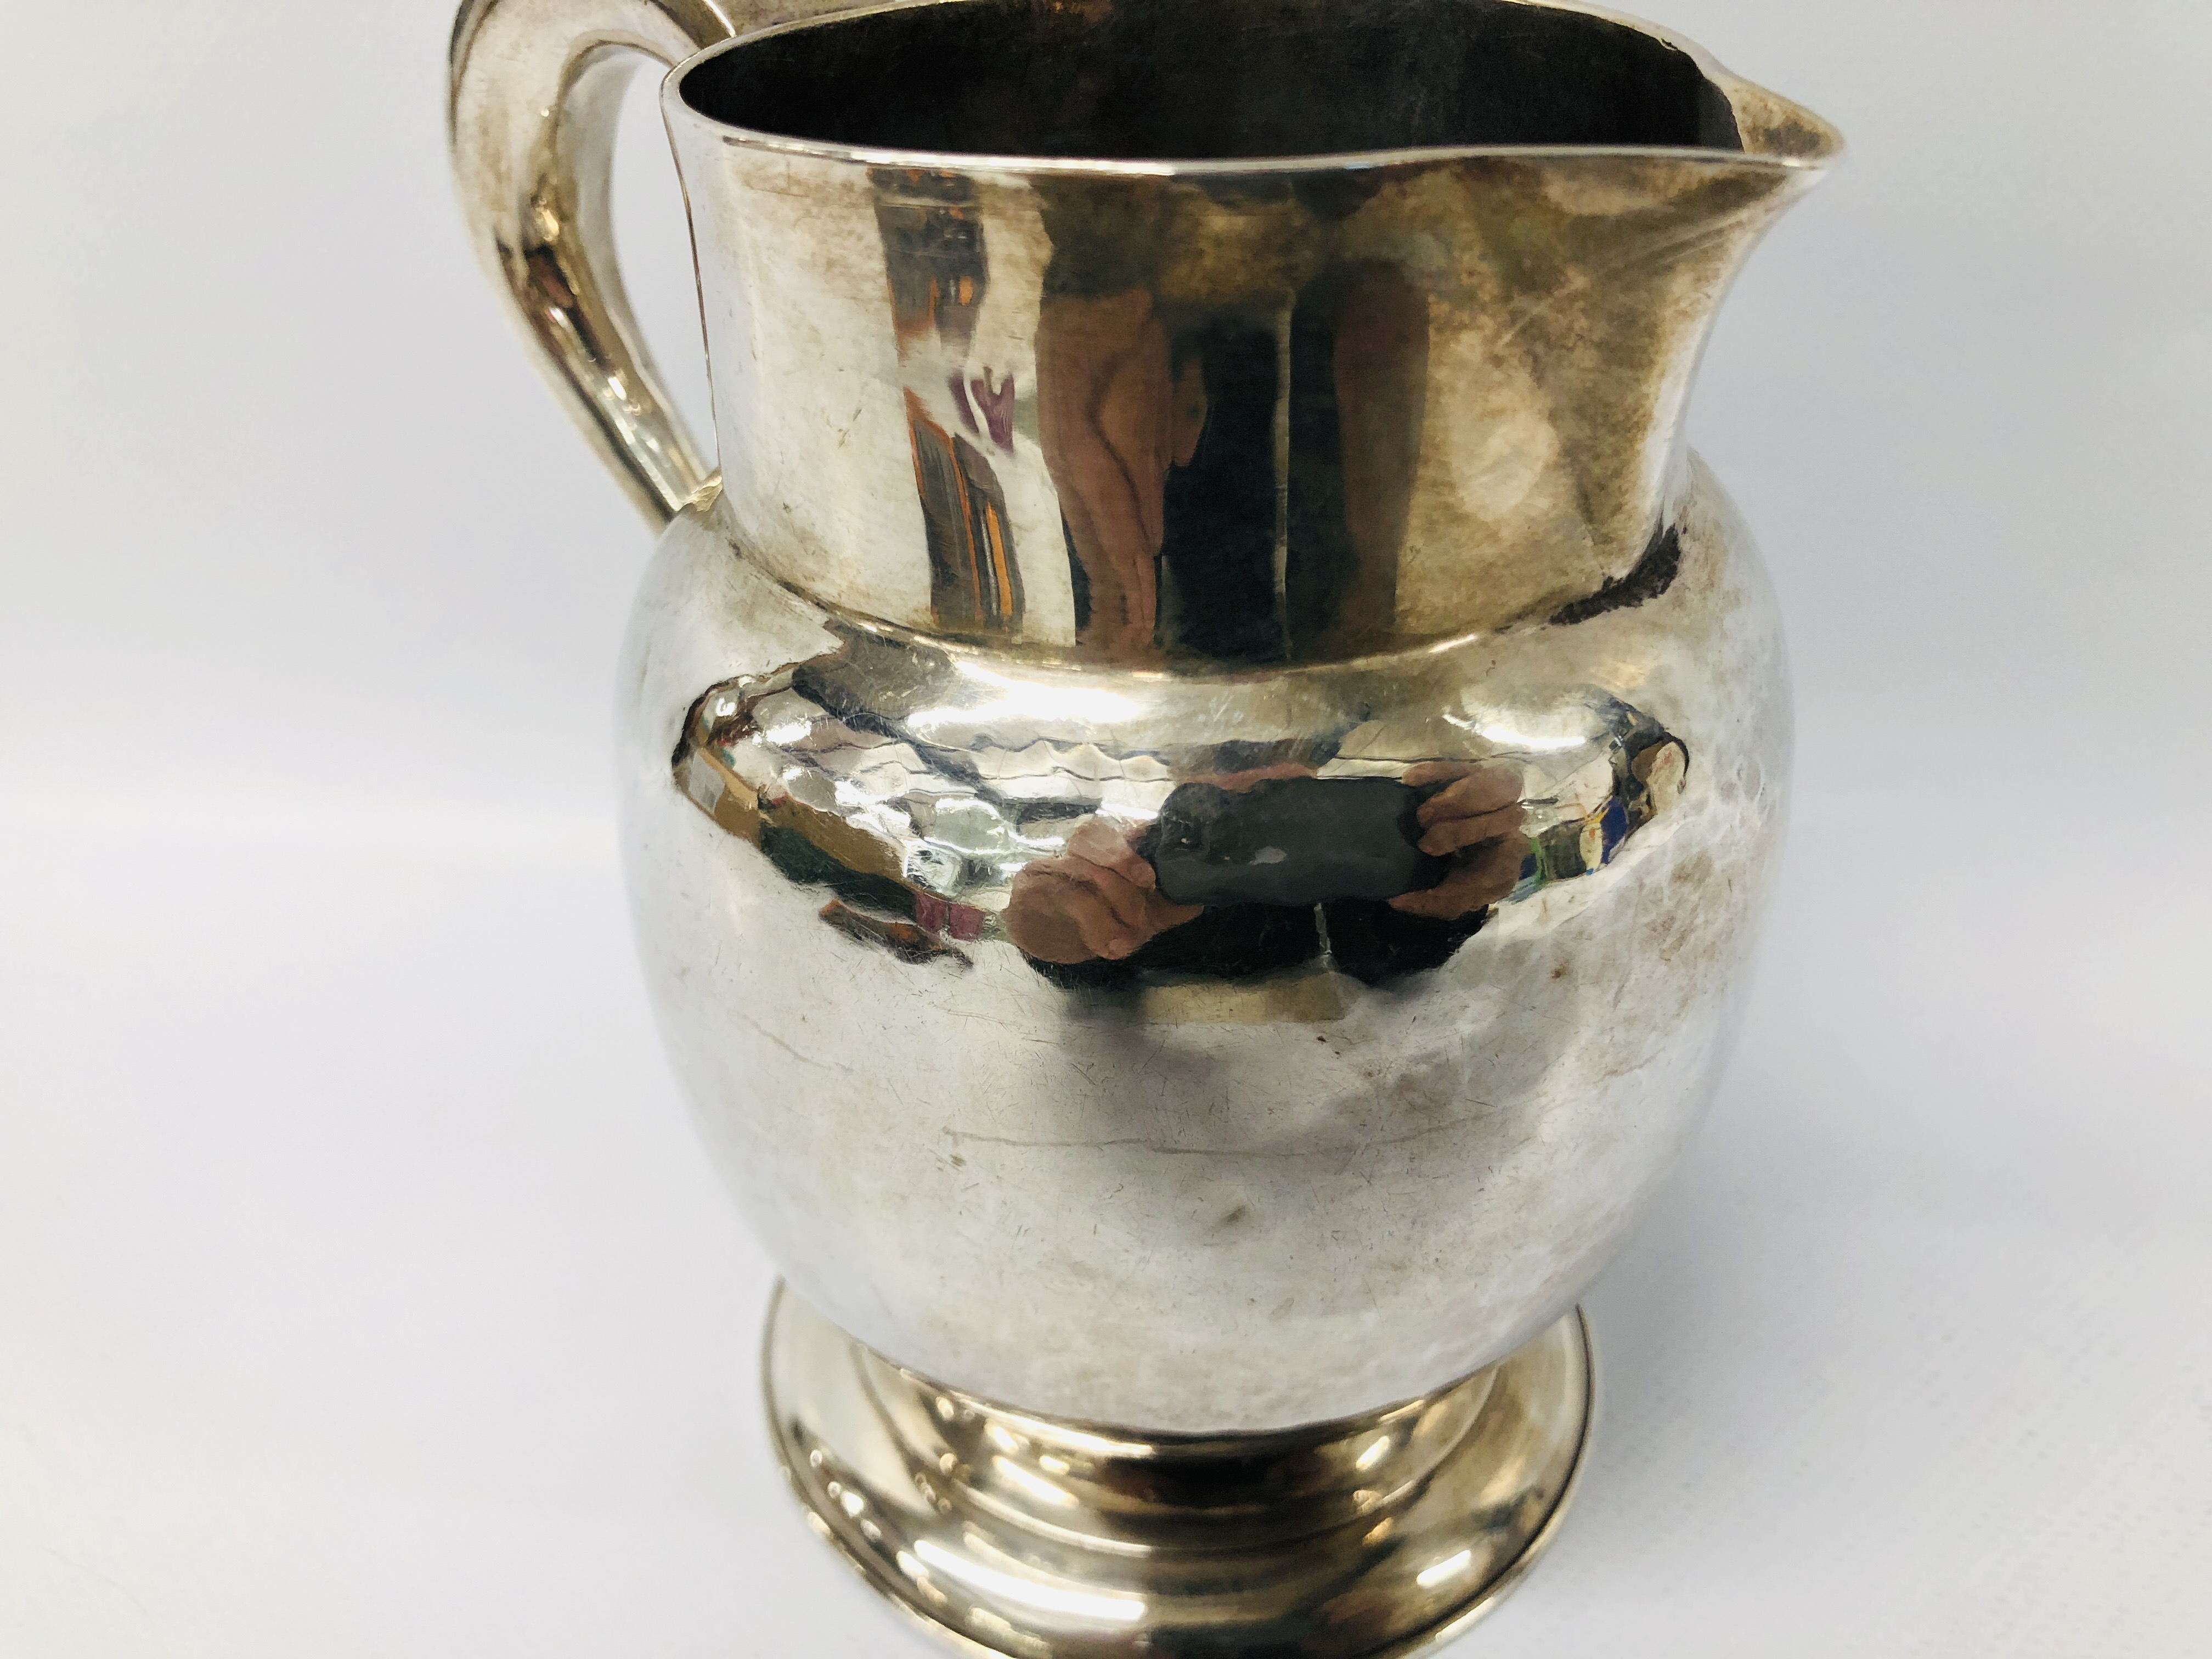 A GEORGE III SILVER JUG, THE 'S' SHAPED HANDLE ON A PLAIN BULBOUS BODY, NEWCASTLE 1790, J. - Image 13 of 21